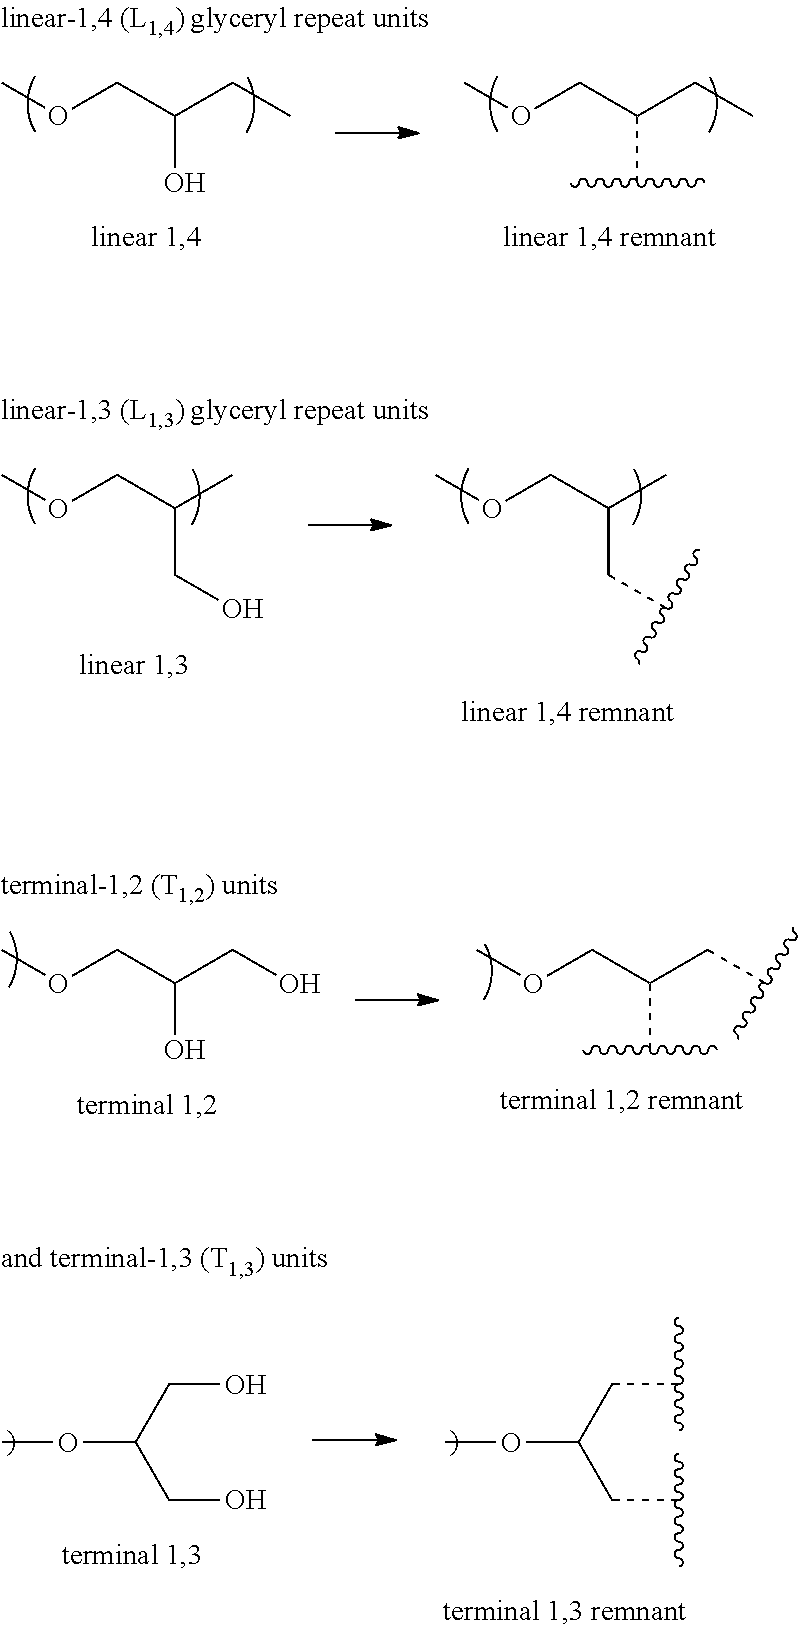 Ultraviolet radiation absorbing polyethers